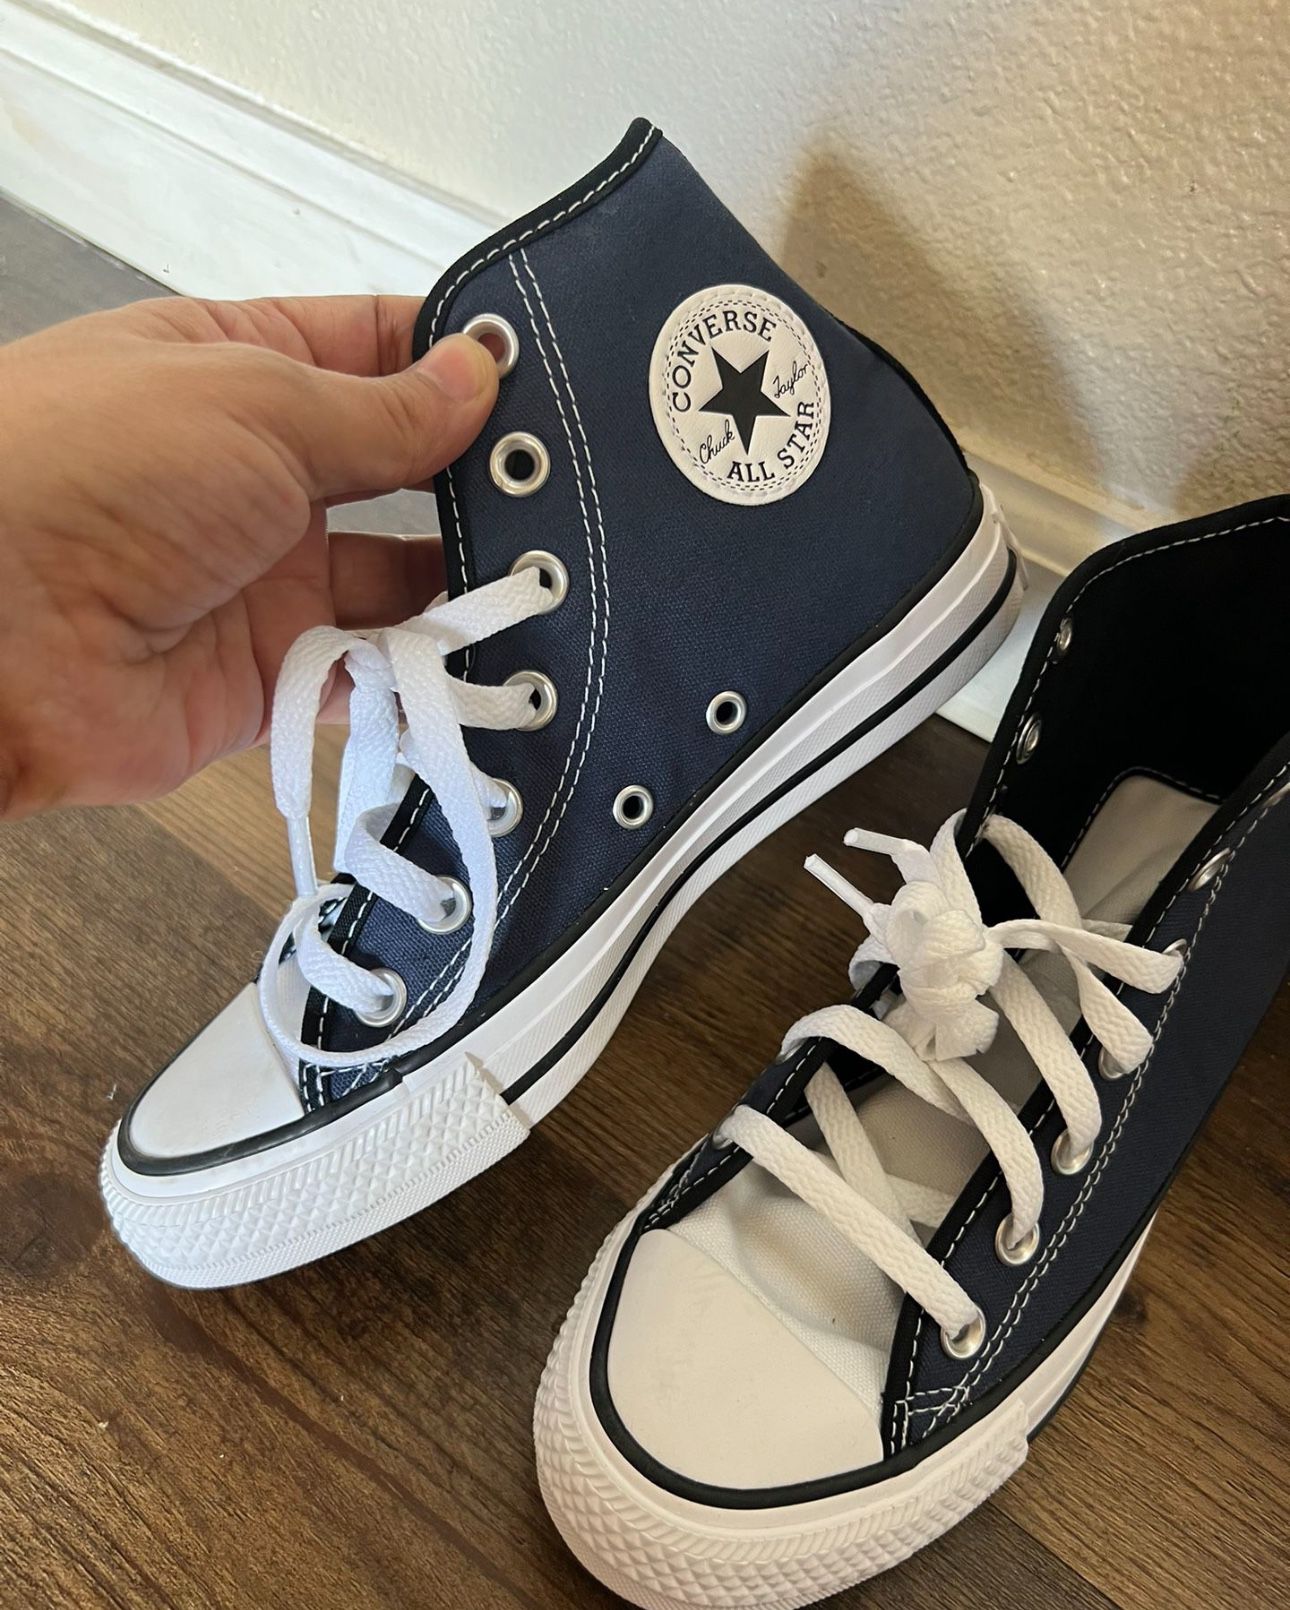 Converse Navy Size For Women 5.5 For Men 3.5